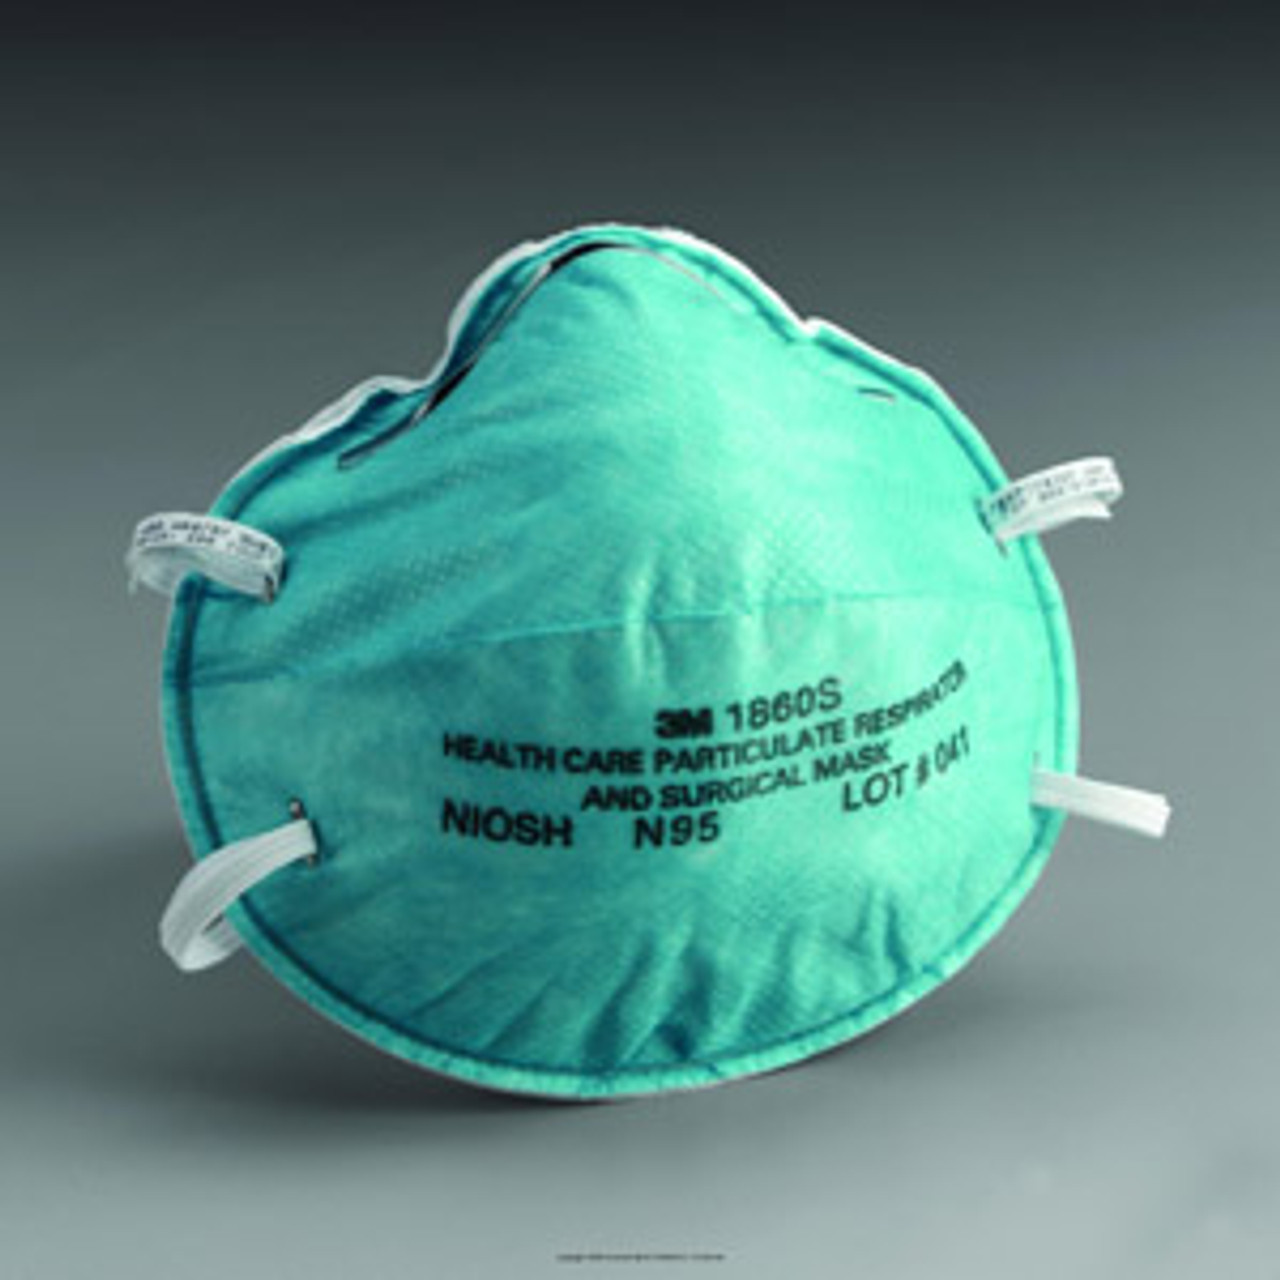 N95 Health Care Particulate Respirator and Surgical Mask MMM1860SCS